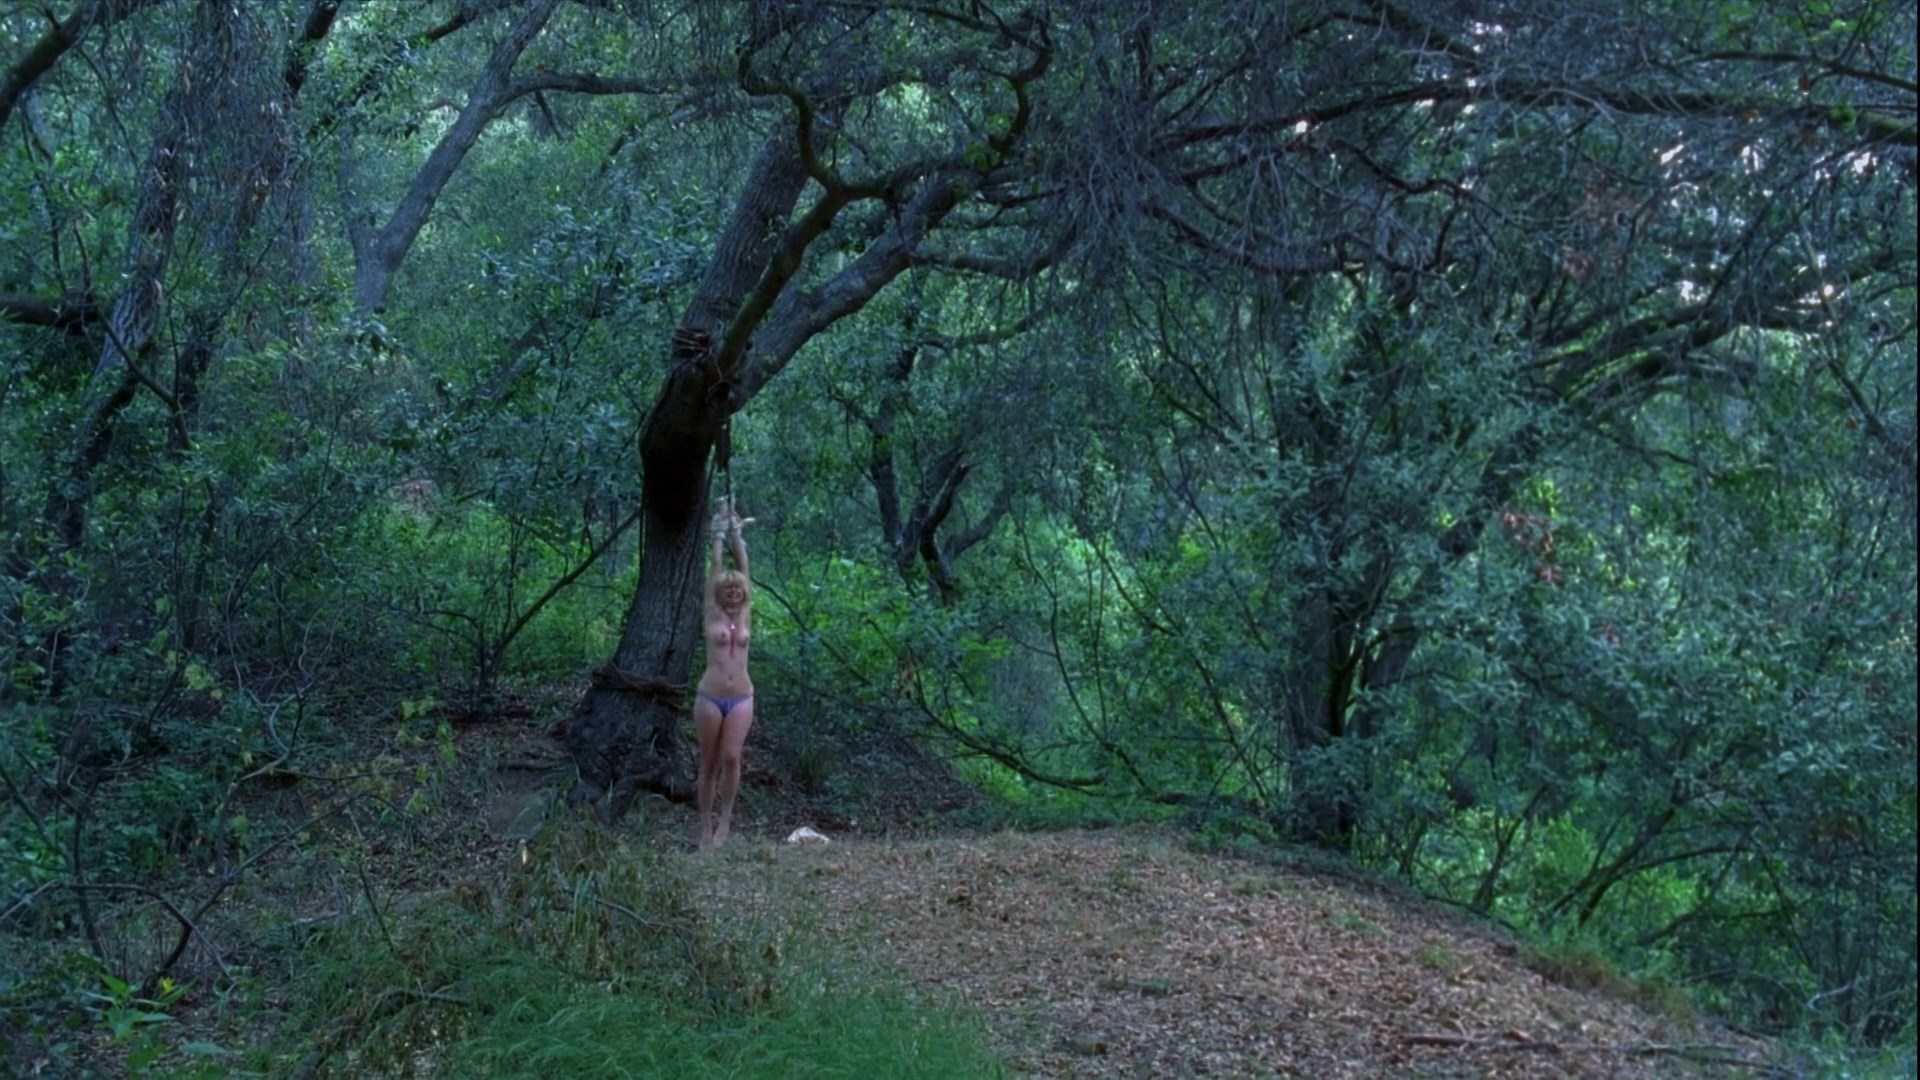 Quick weirdly edited scene where Tara is hanging out from the tree topless.